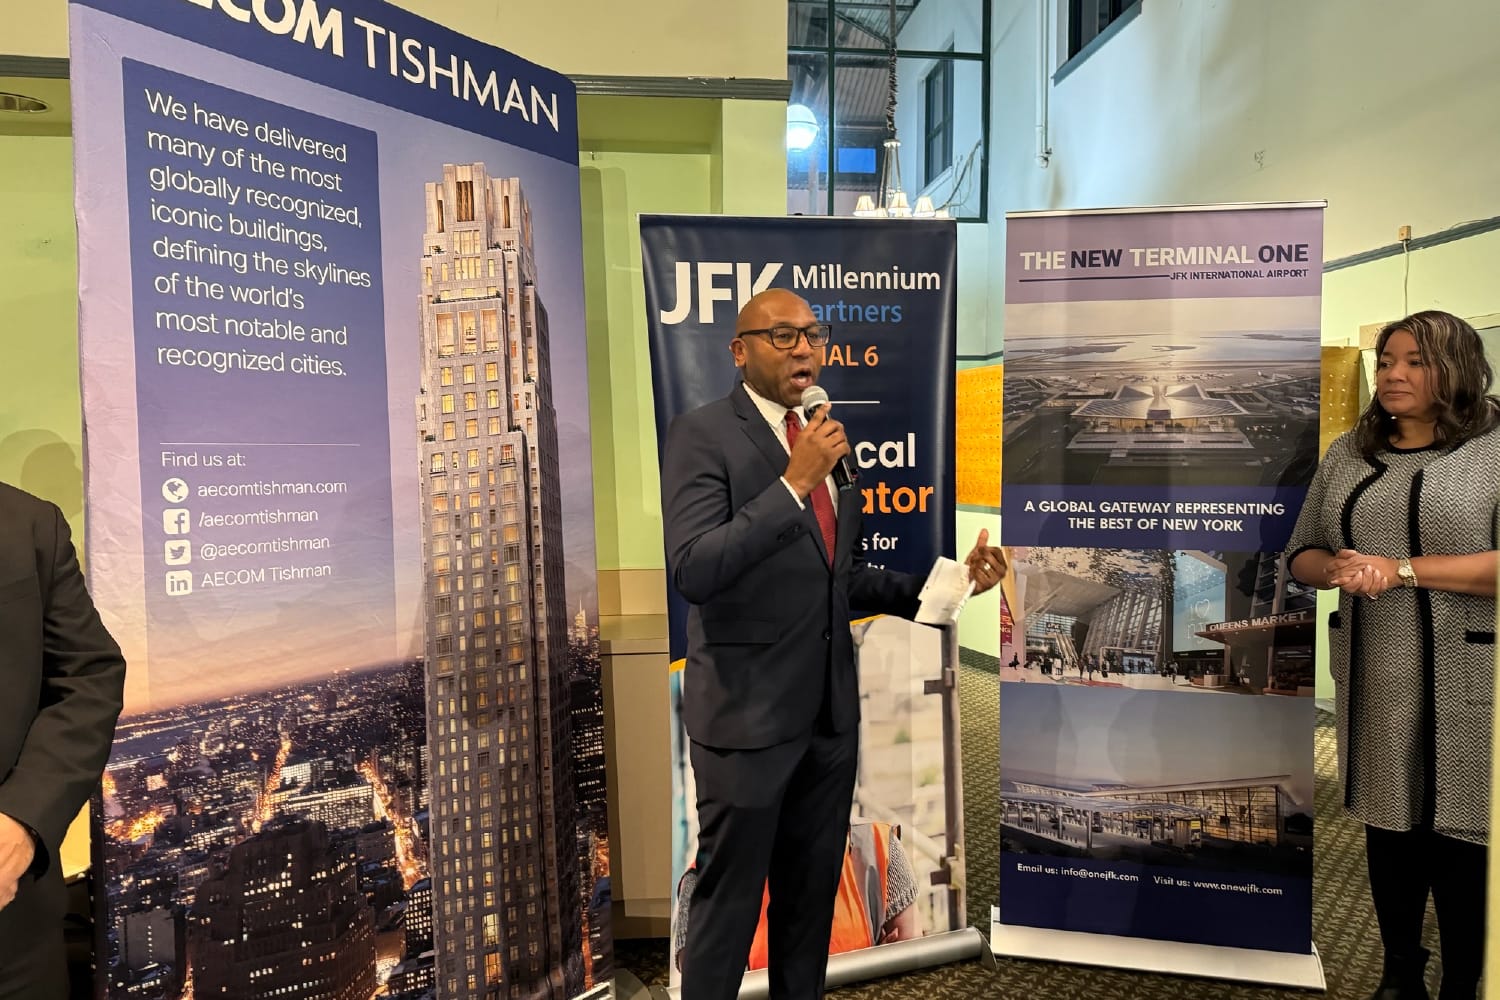 Donovan Richards at the first-ever New Terminal One and Terminal Six- Projects Learning Day